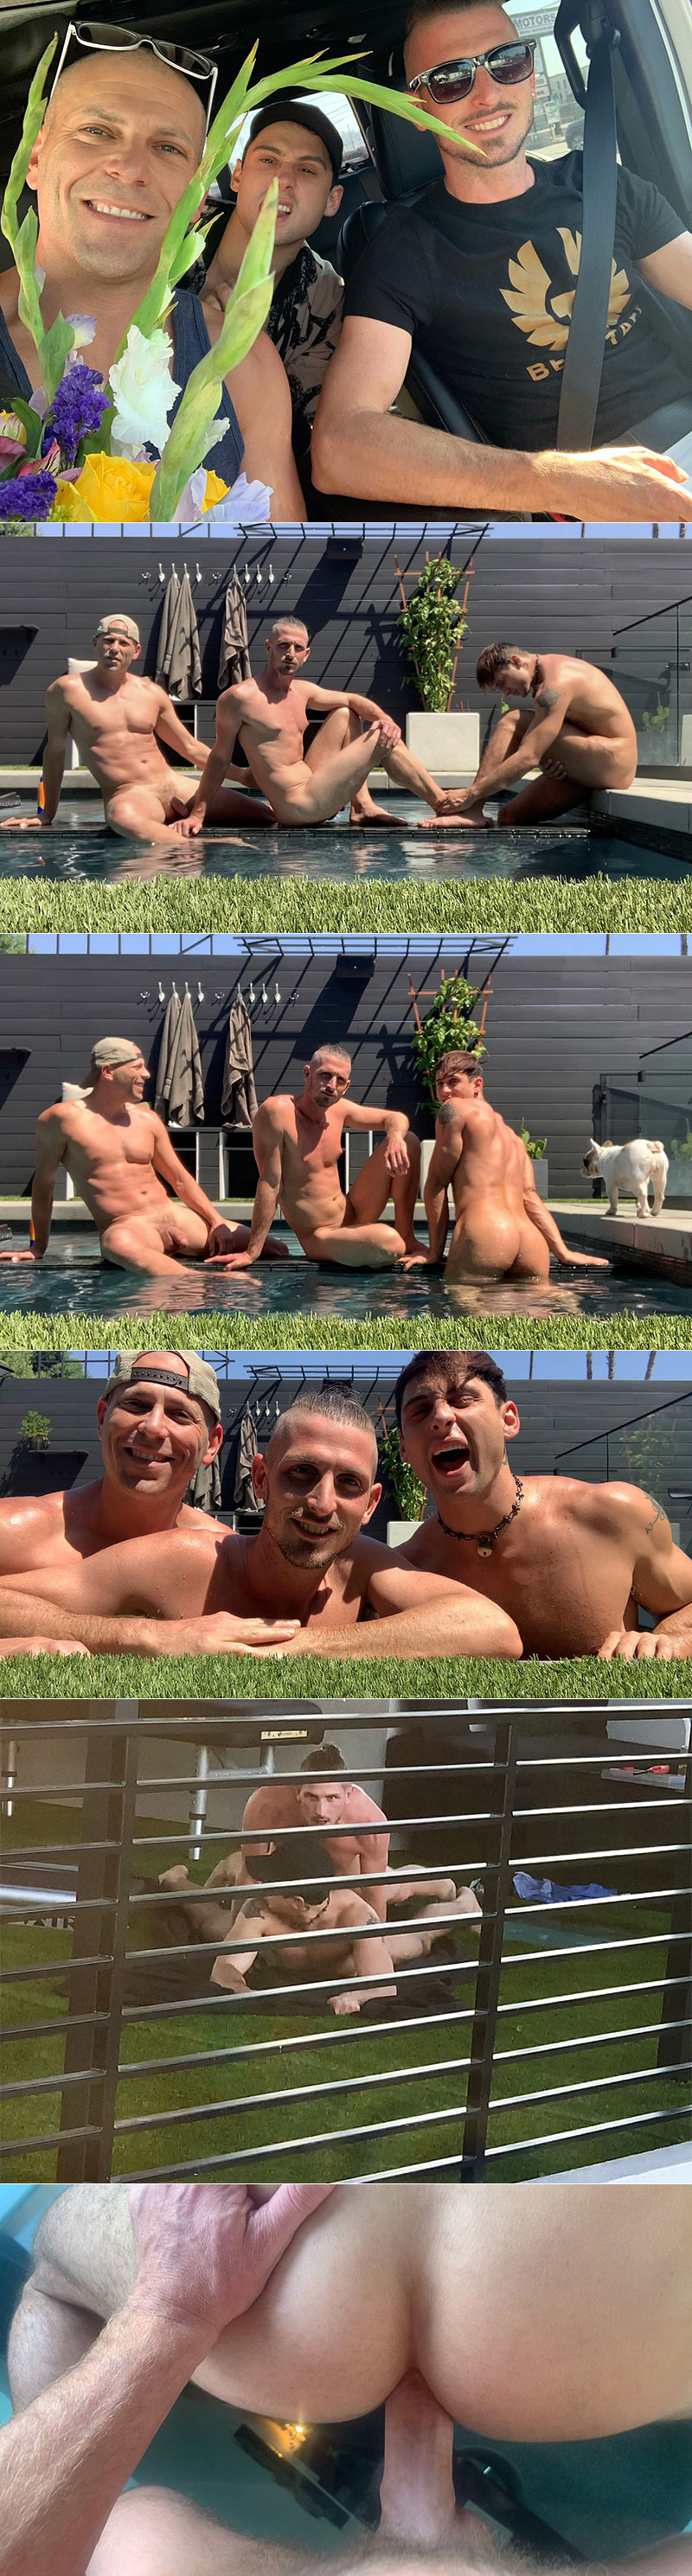 TheBigCMen: "More 3 Way BF Action: Hangin by the Pool & Jarret Moon Bottoms Out"